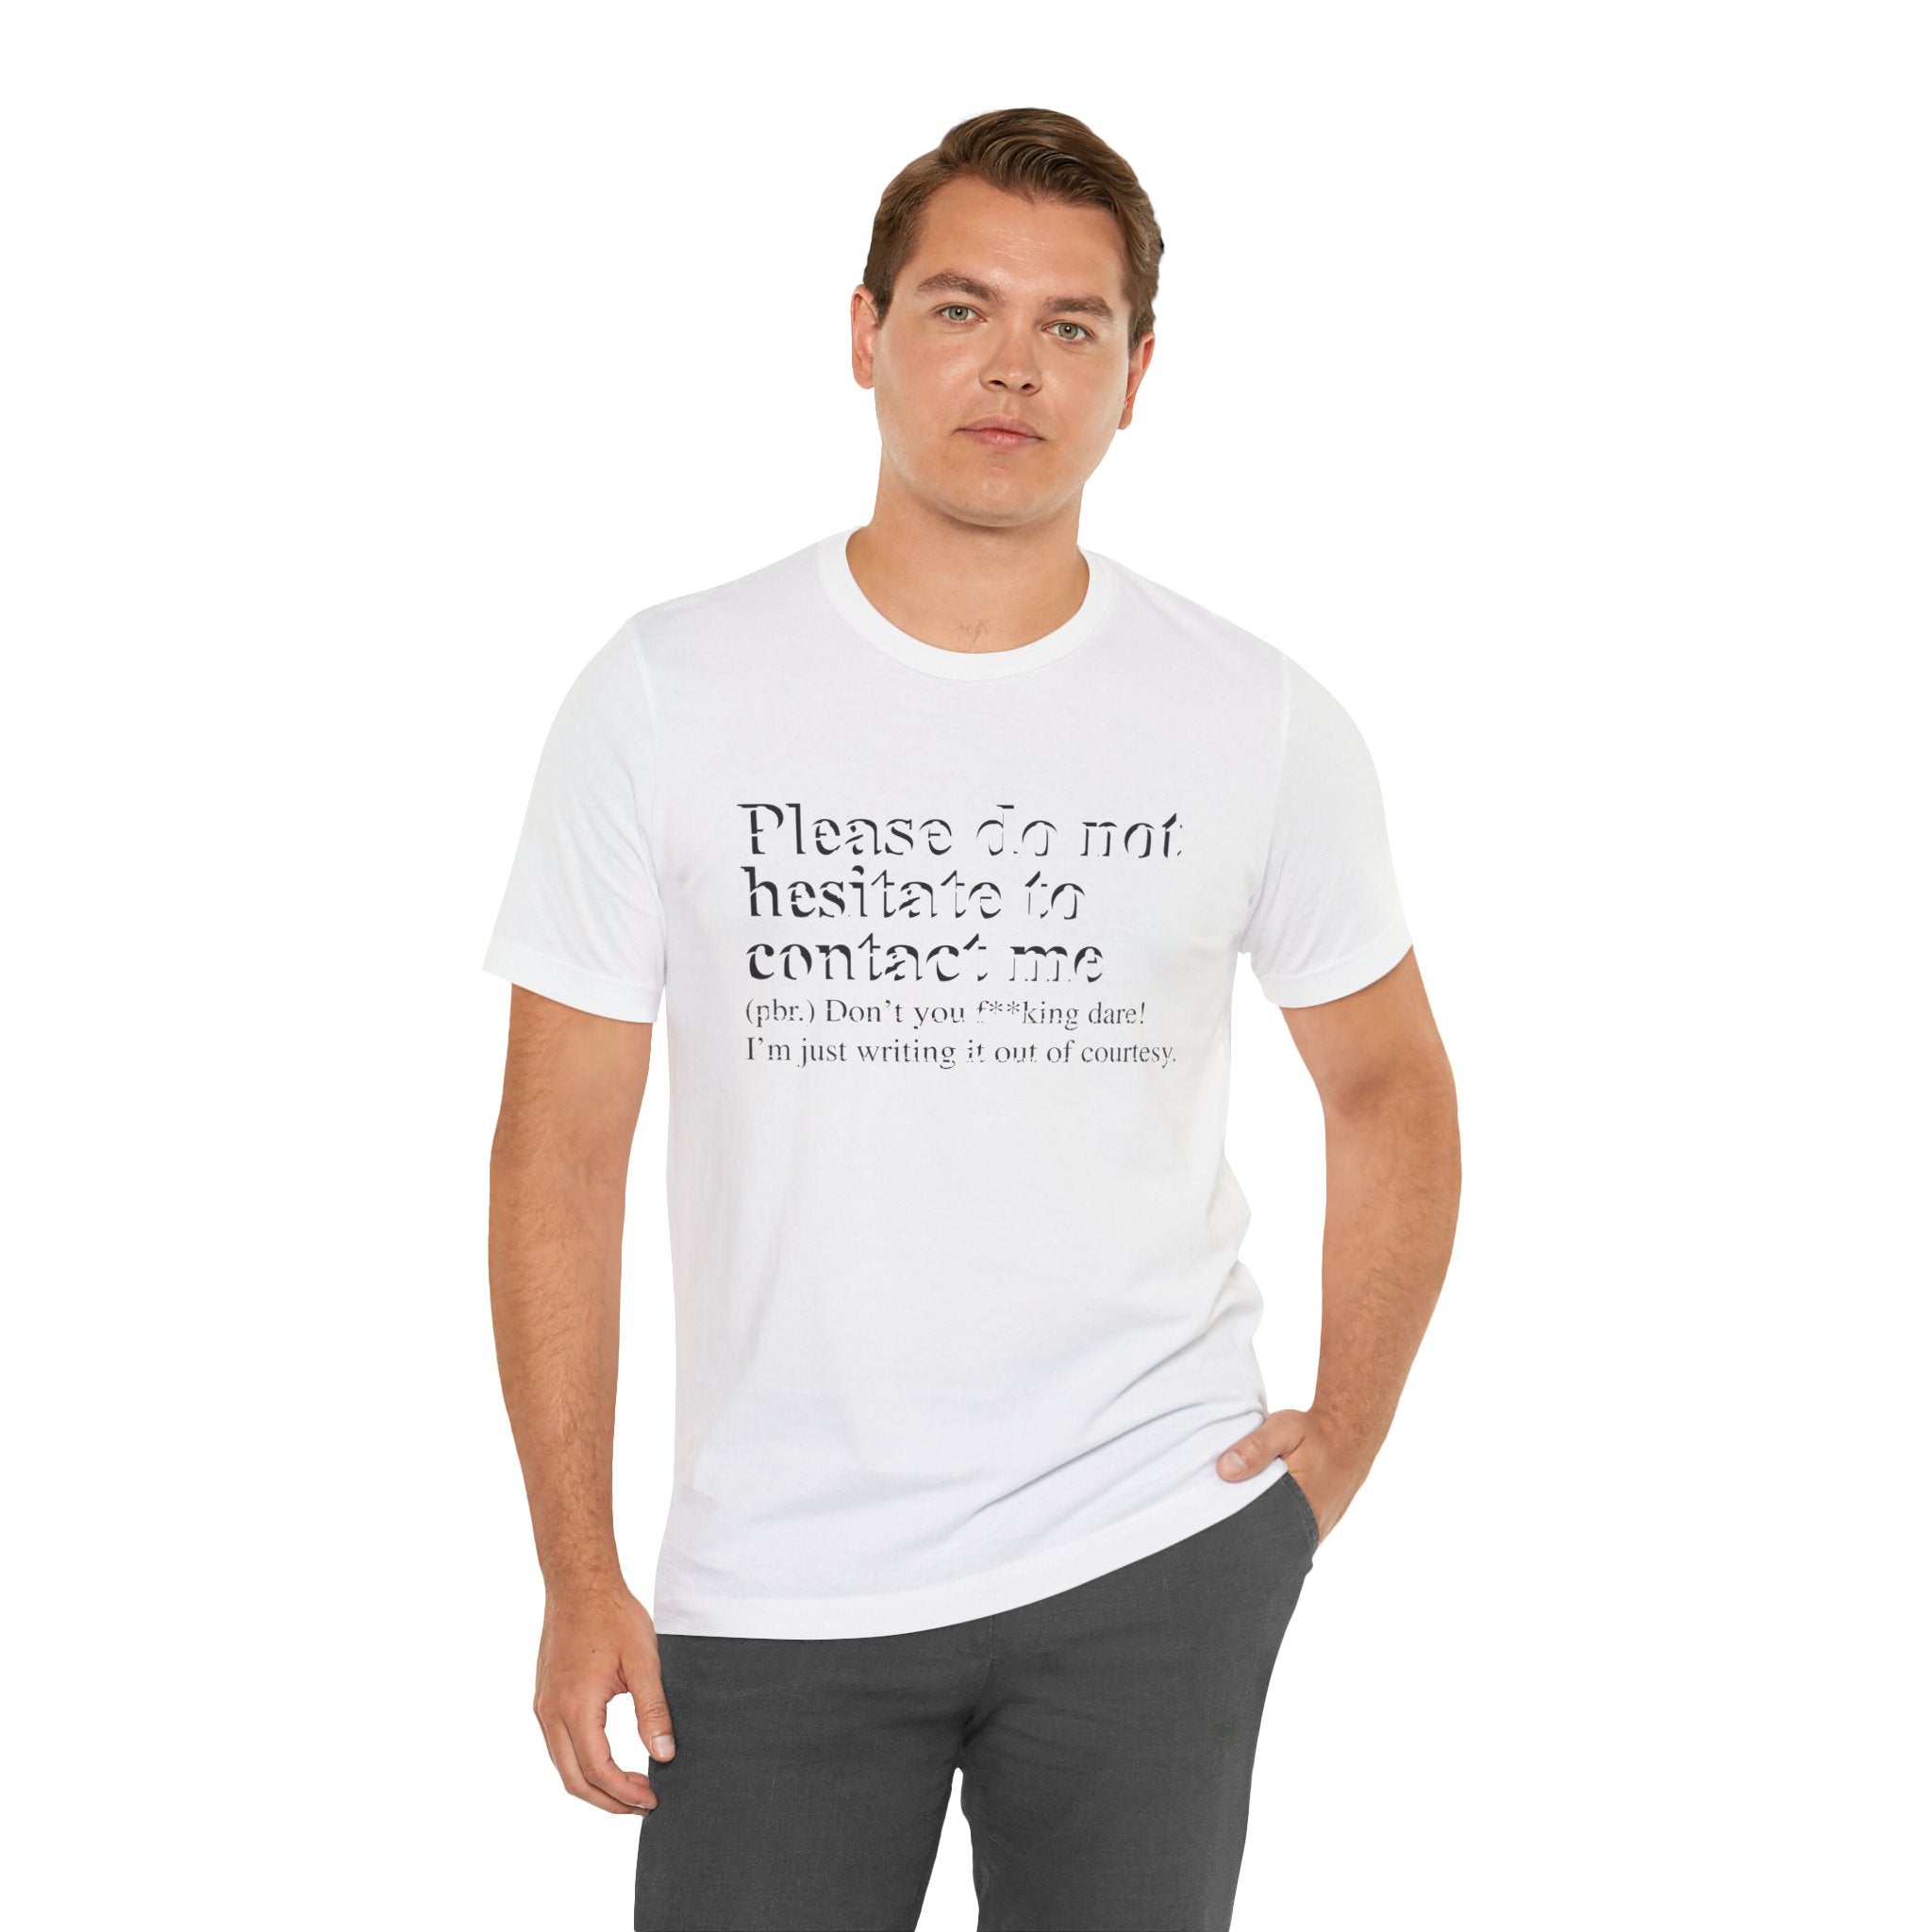 A man stands wearing a Please Do Not Hesitate to Contact Me T-Shirt, looking directly at the camera, on a white background.